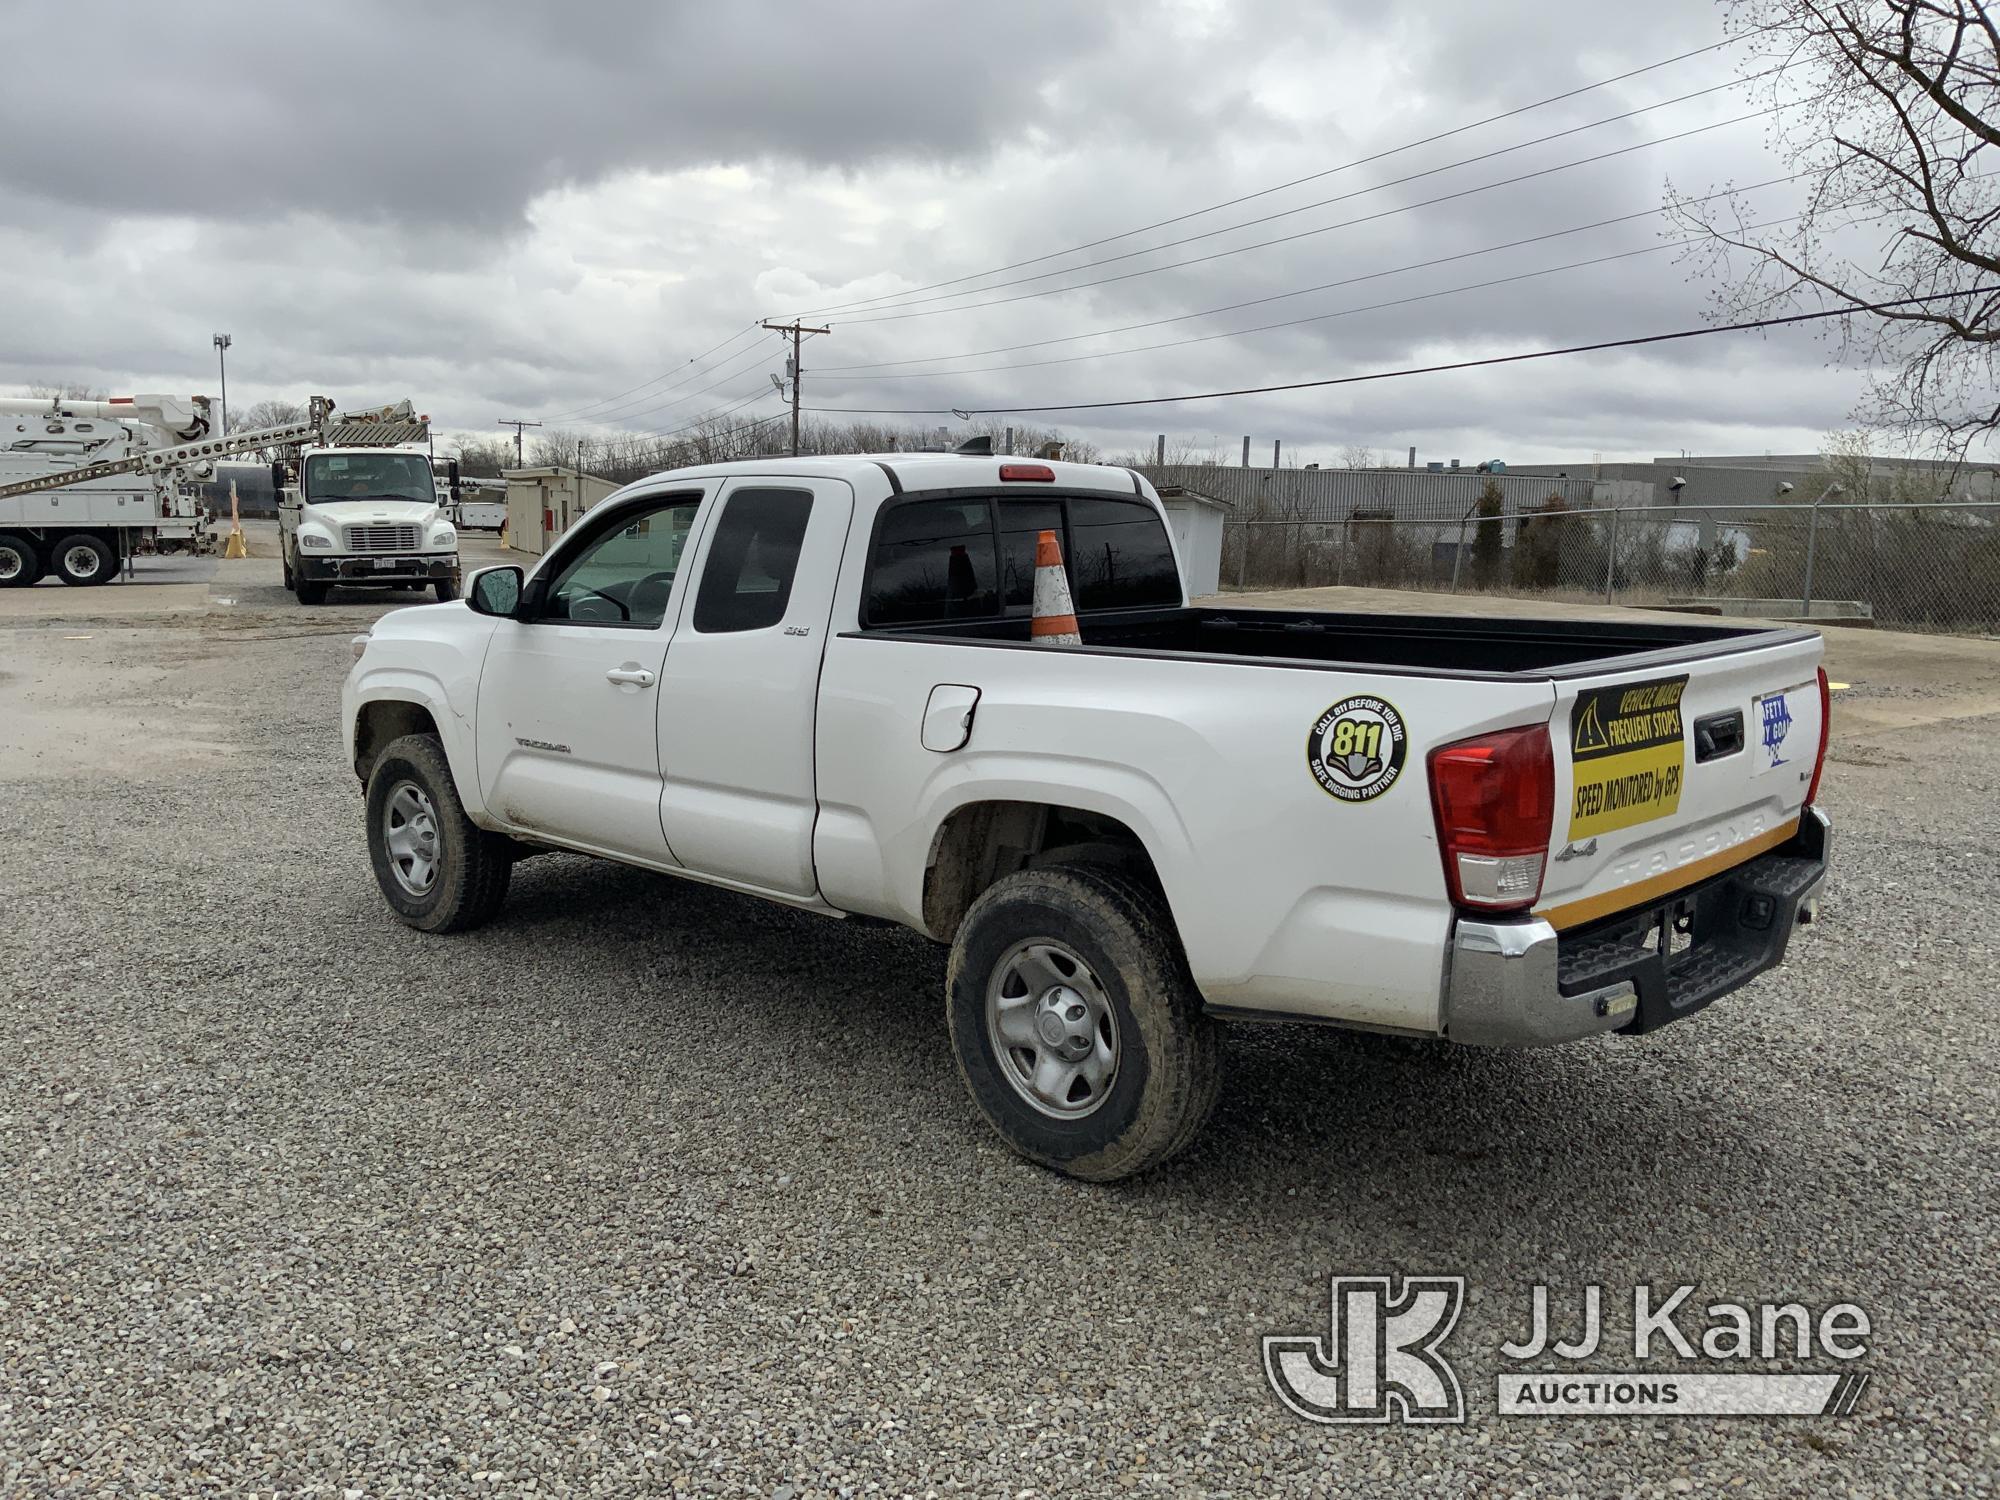 (Fort Wayne, IN) 2016 Toyota Tacoma 4x4 Extended-Cab Pickup Truck Runs & Moves